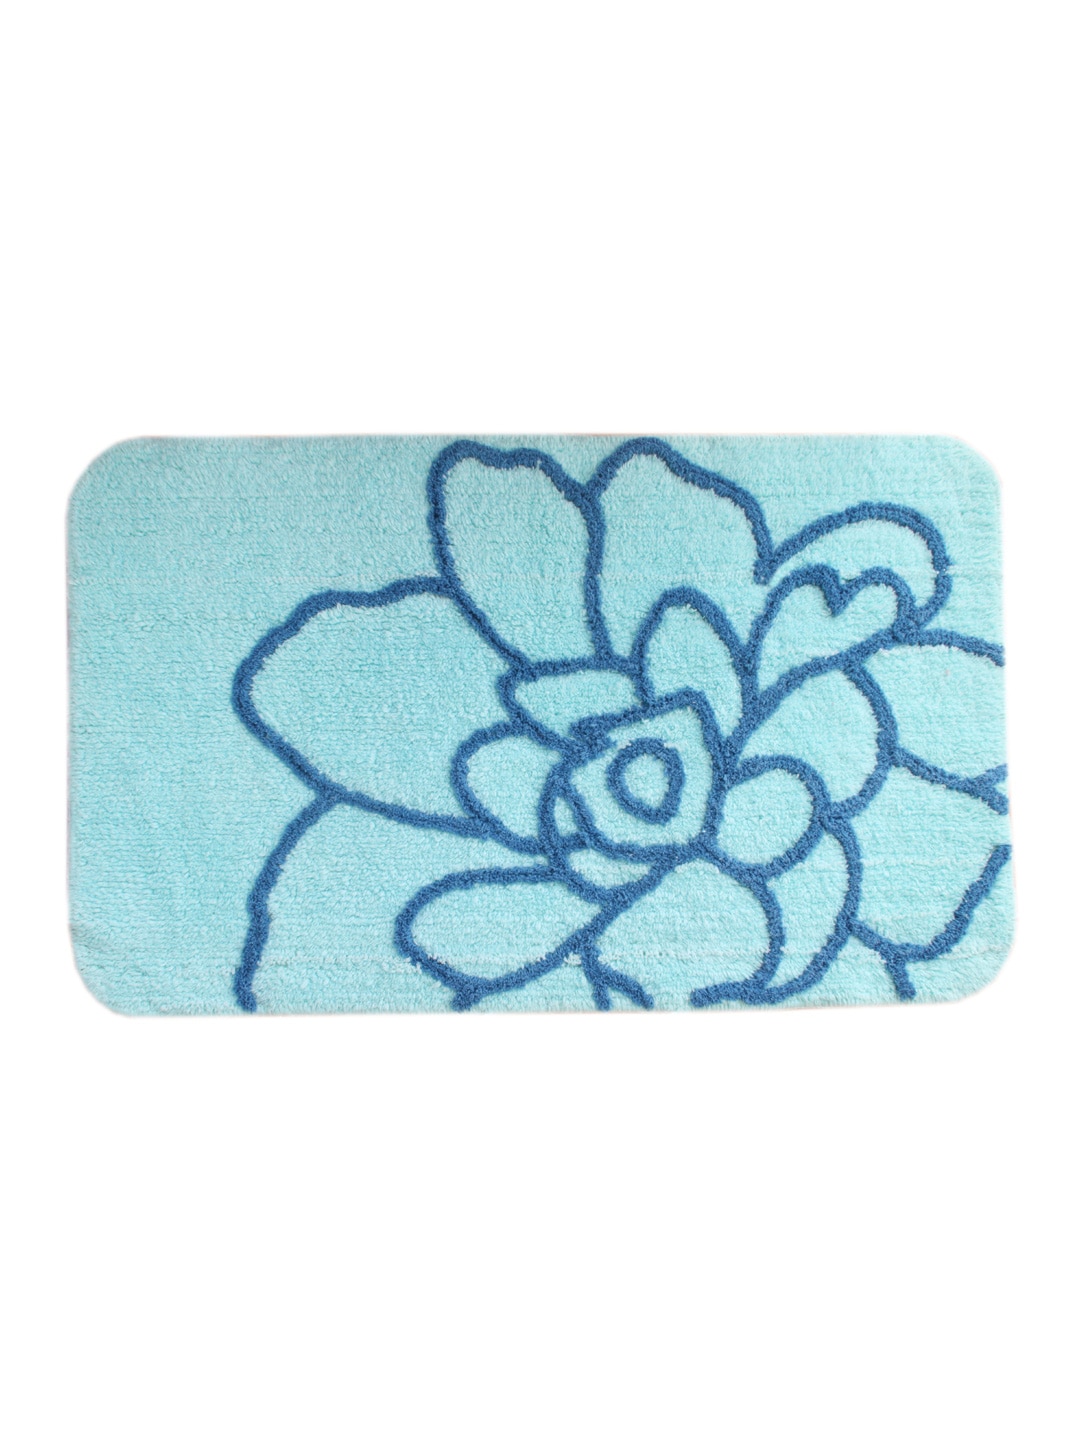 Saral Home Turquoise Blue Rectangular Bath Rug Price in India